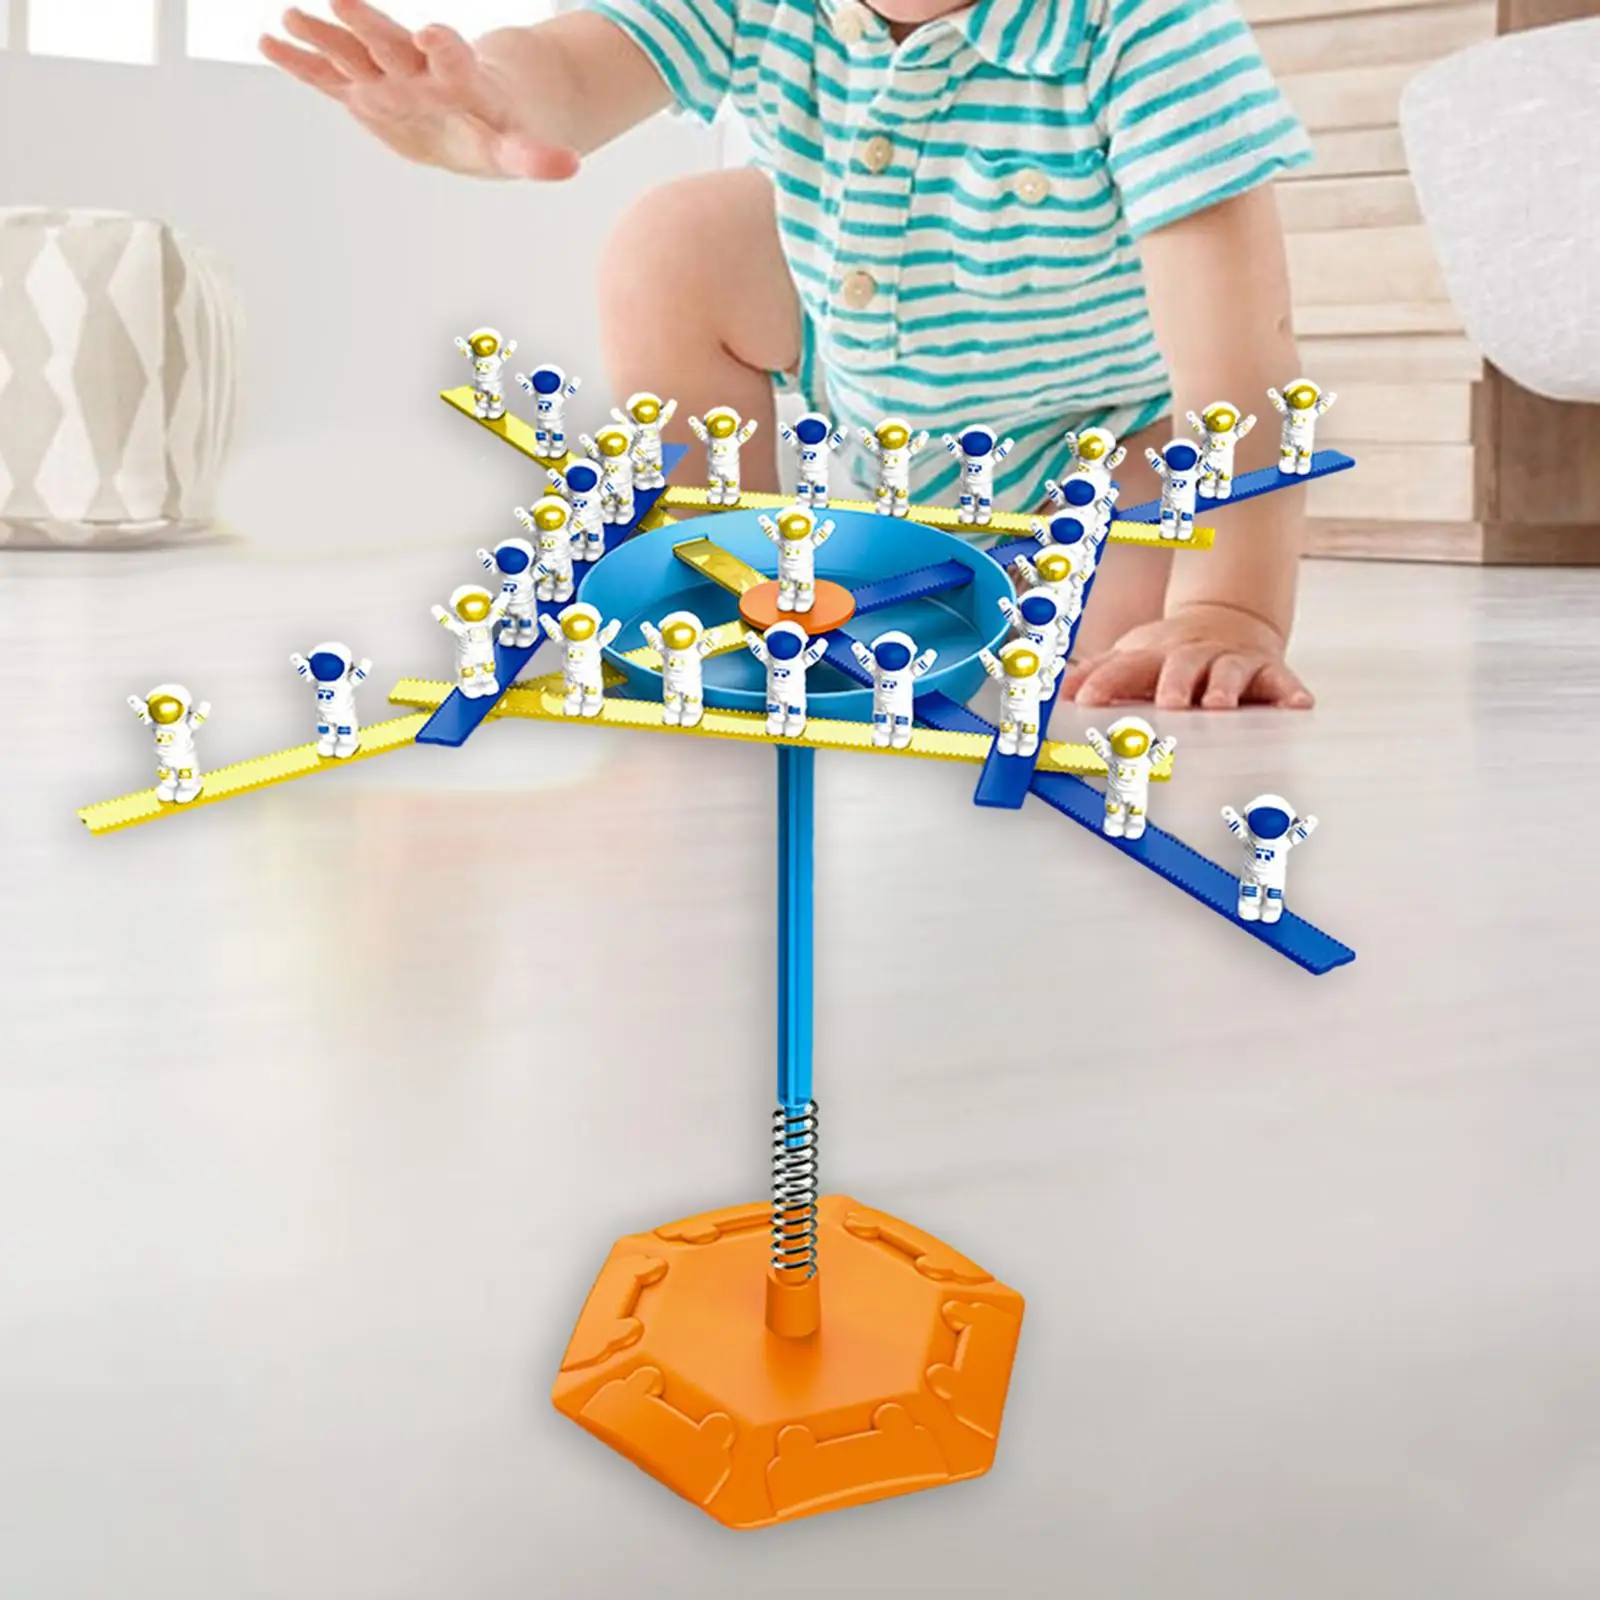 Astronaut Balance Stacking Blocks Game Stacker Game with 40 Spaceman Sensory Toy Develops Motor Skills for Age 4 5 6 Year Old